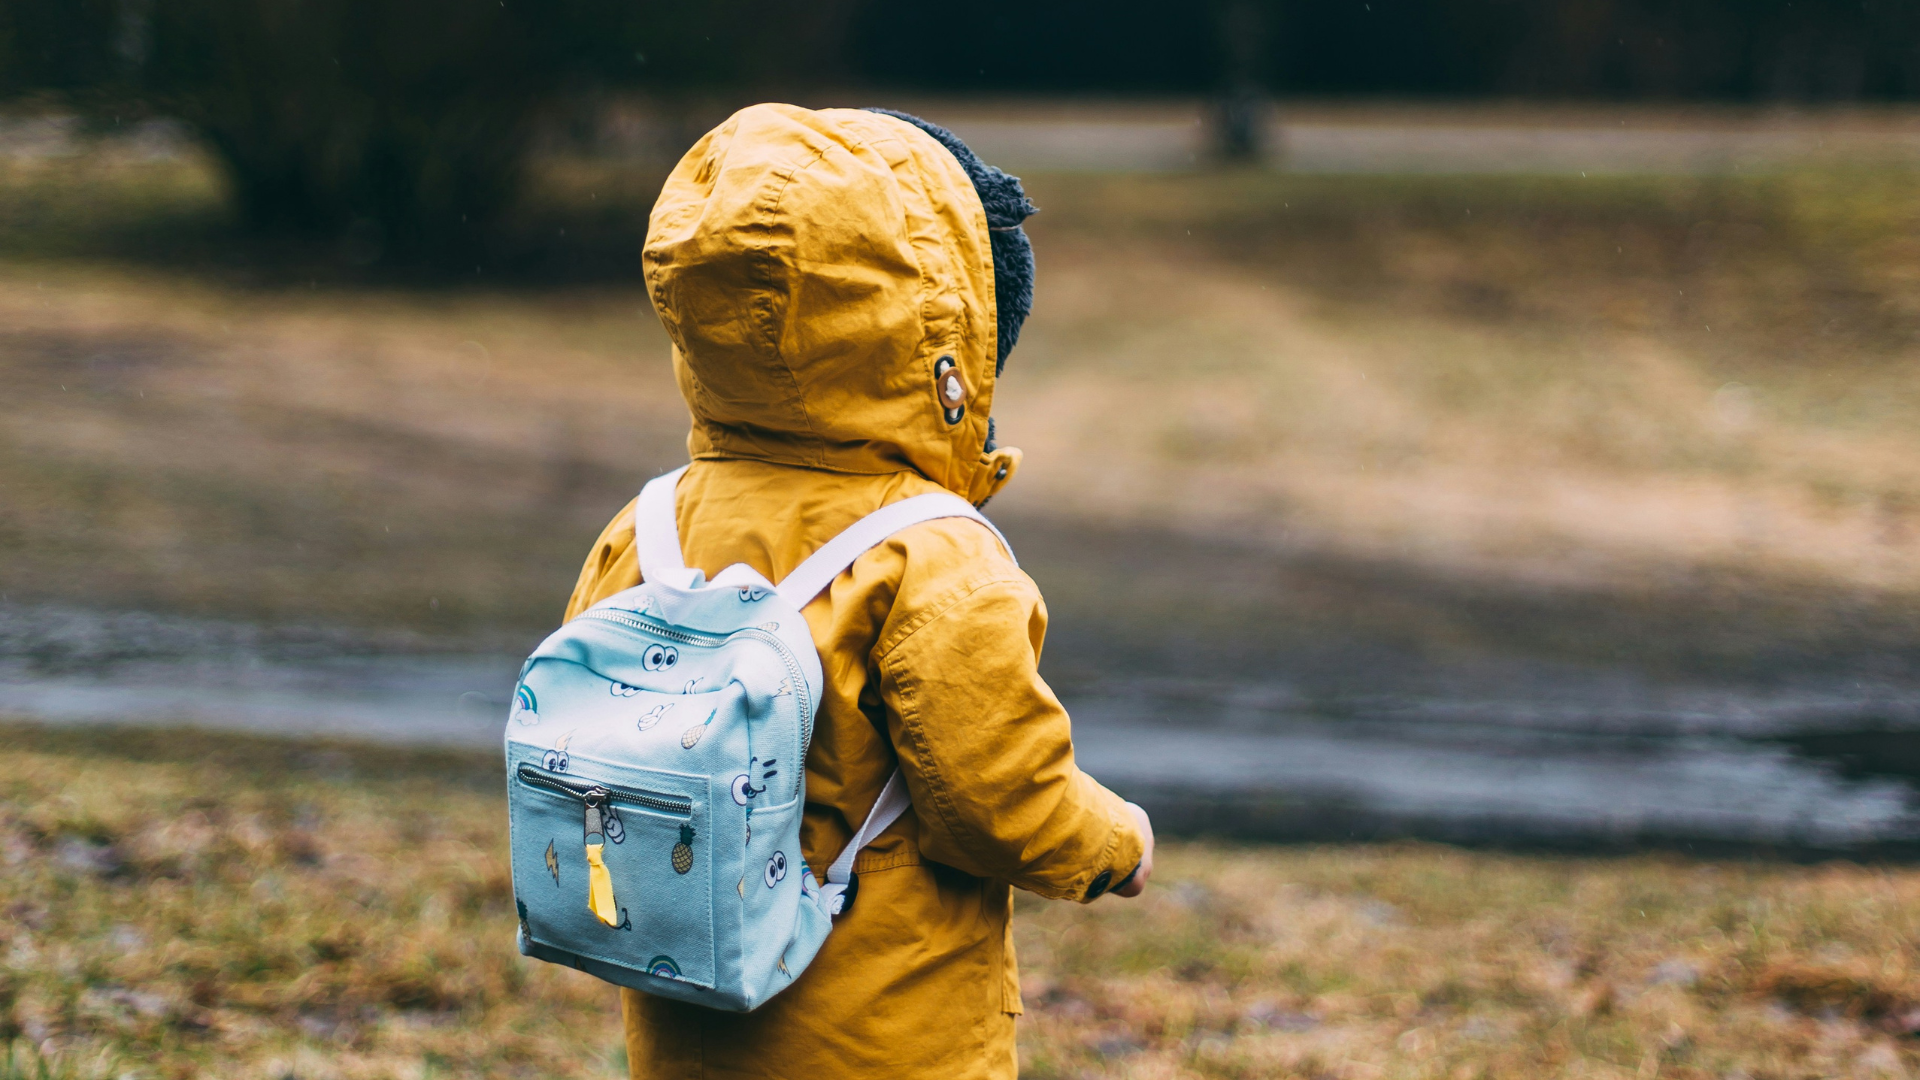 the back of a young kid wearing a yellow raincoat and wearing a backpack on a rainy day